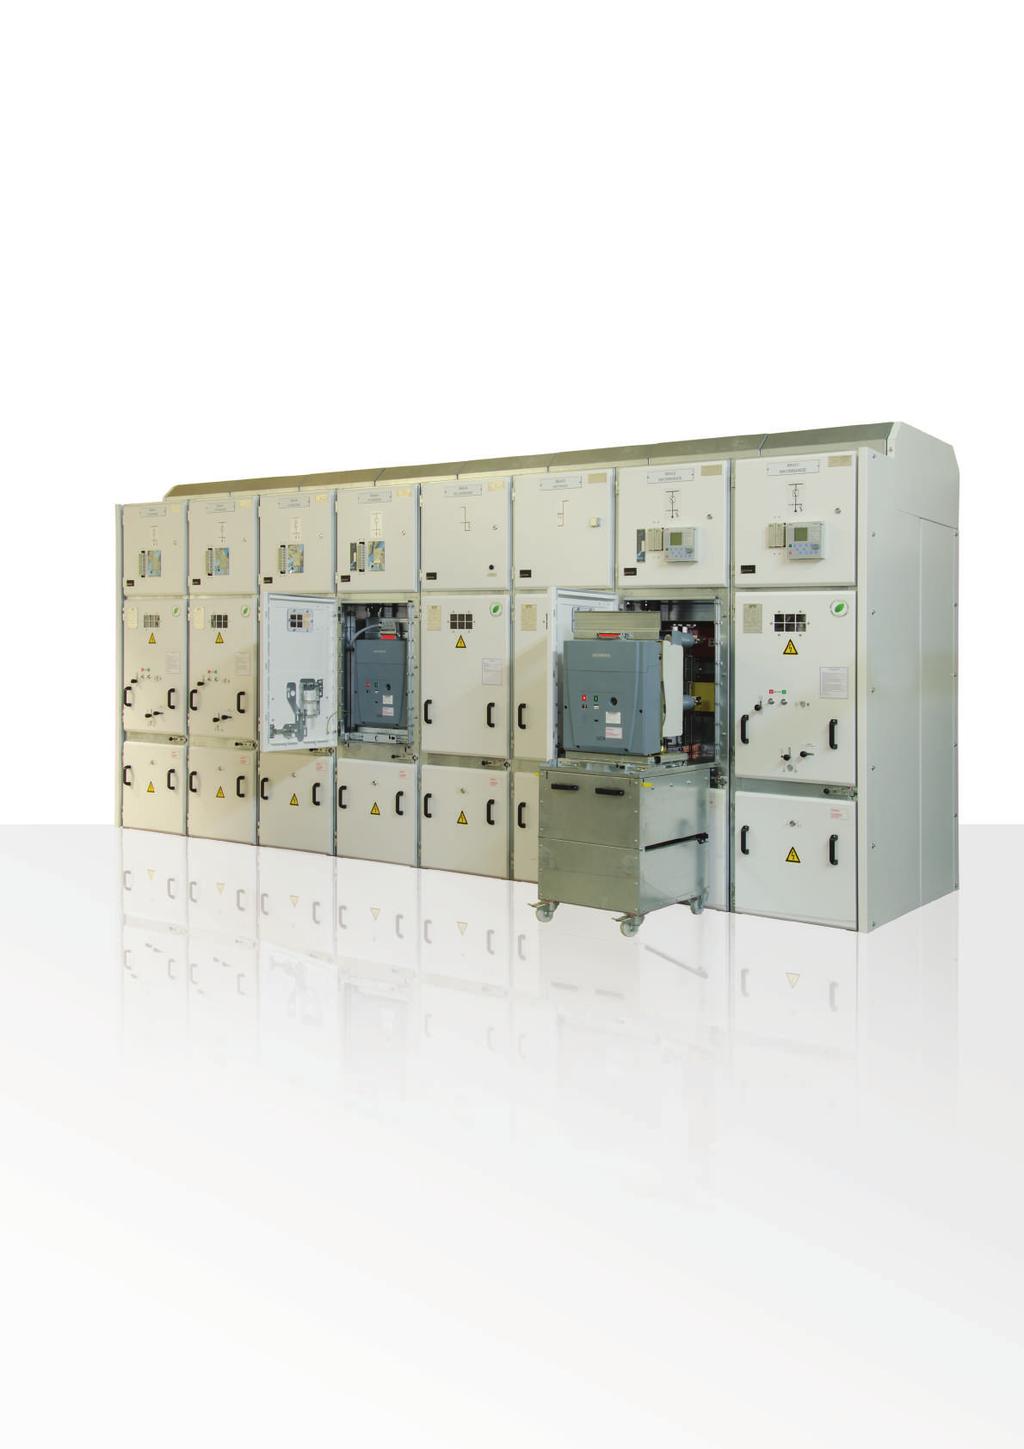 SNC Series Metal Clad Switchgears > up to 36 kv Rated Voltage > up to 2500 A Rated Current > up to 40